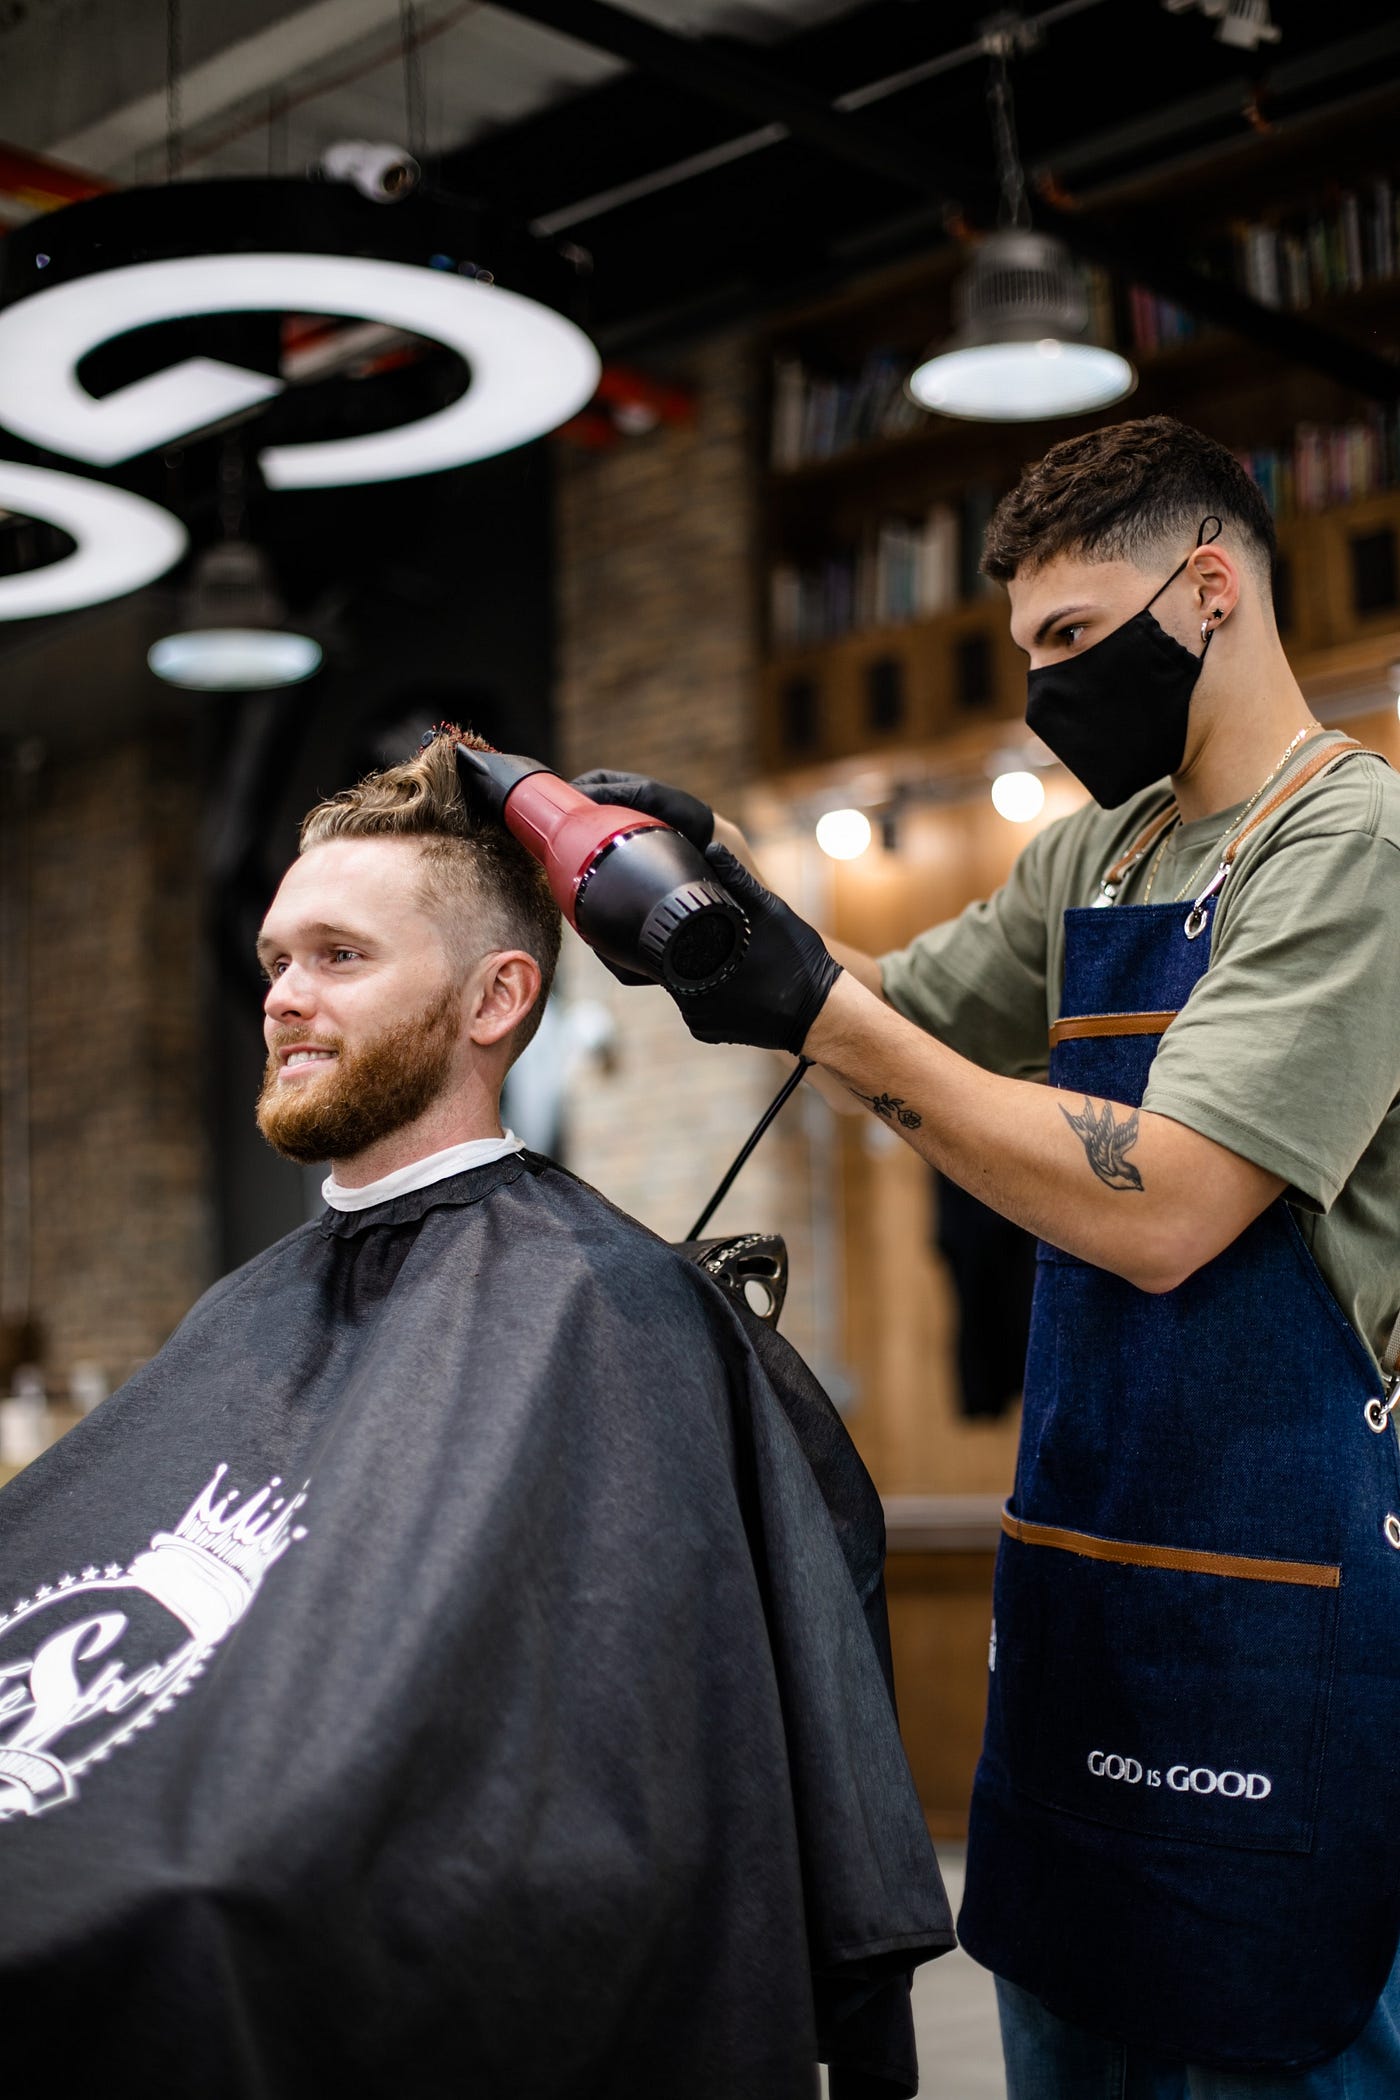 Choosing the Right Material for Your Barber Cape, by Salonwear